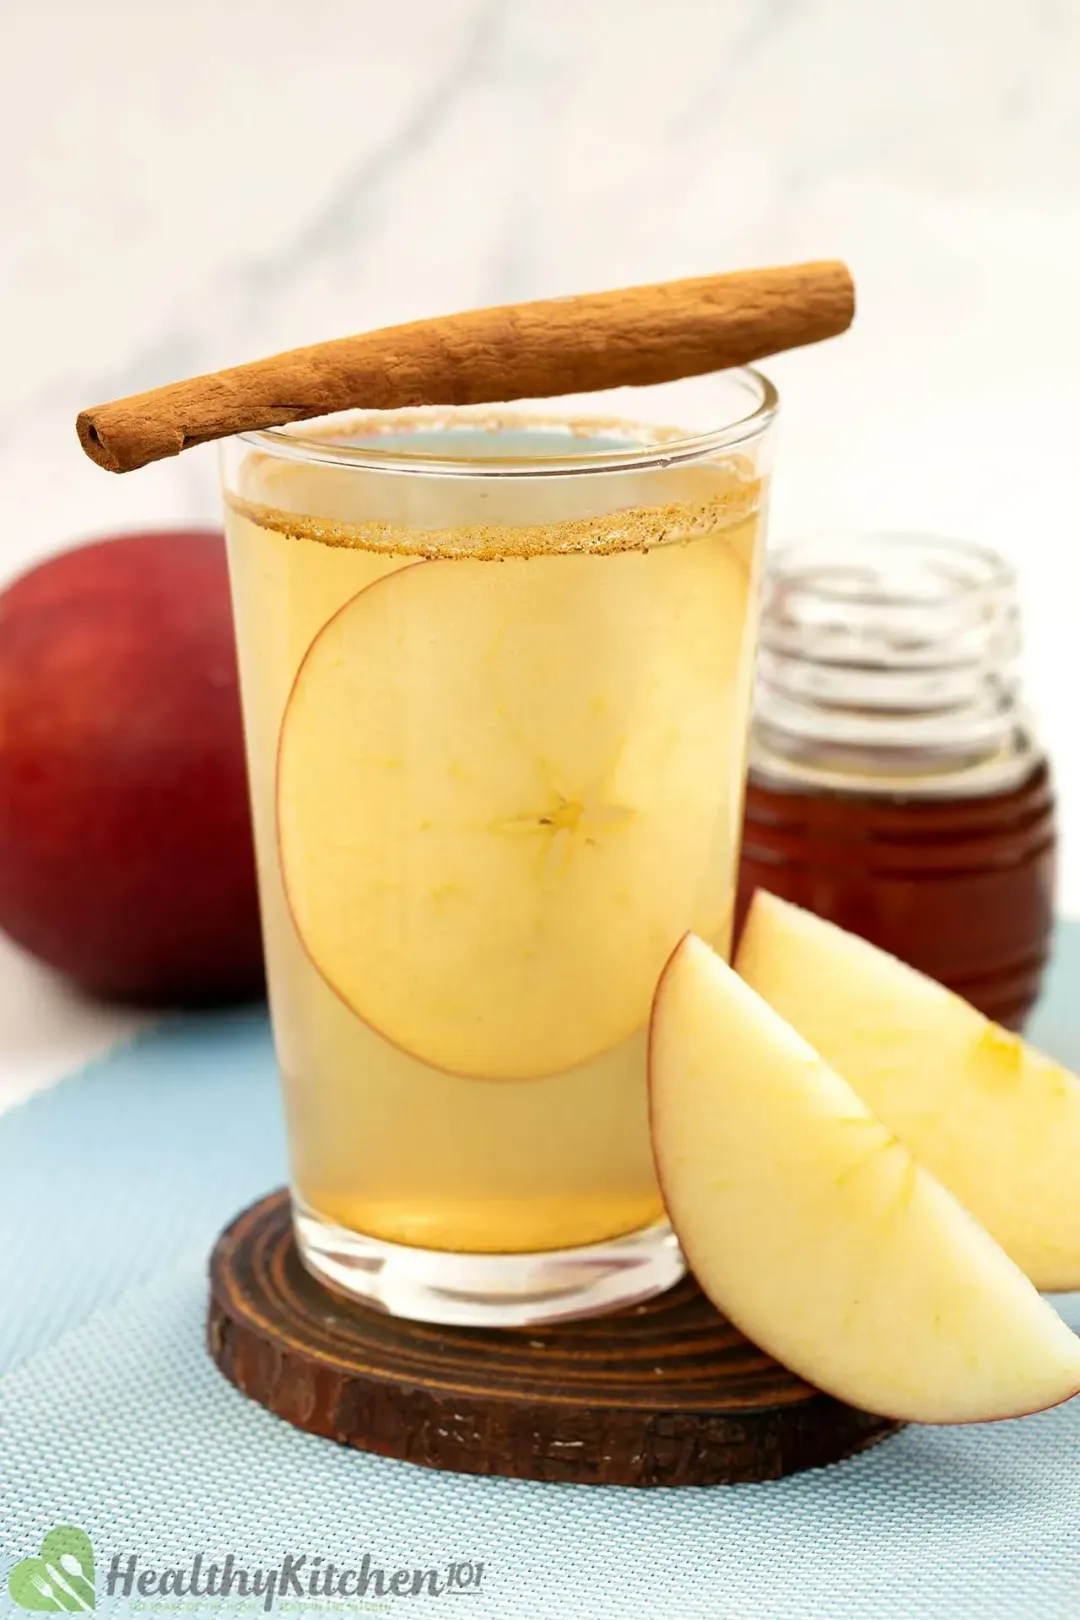 Next to apple wedges and below a cinnamon stick, a shot glass of apple honey cider with apple slice inside